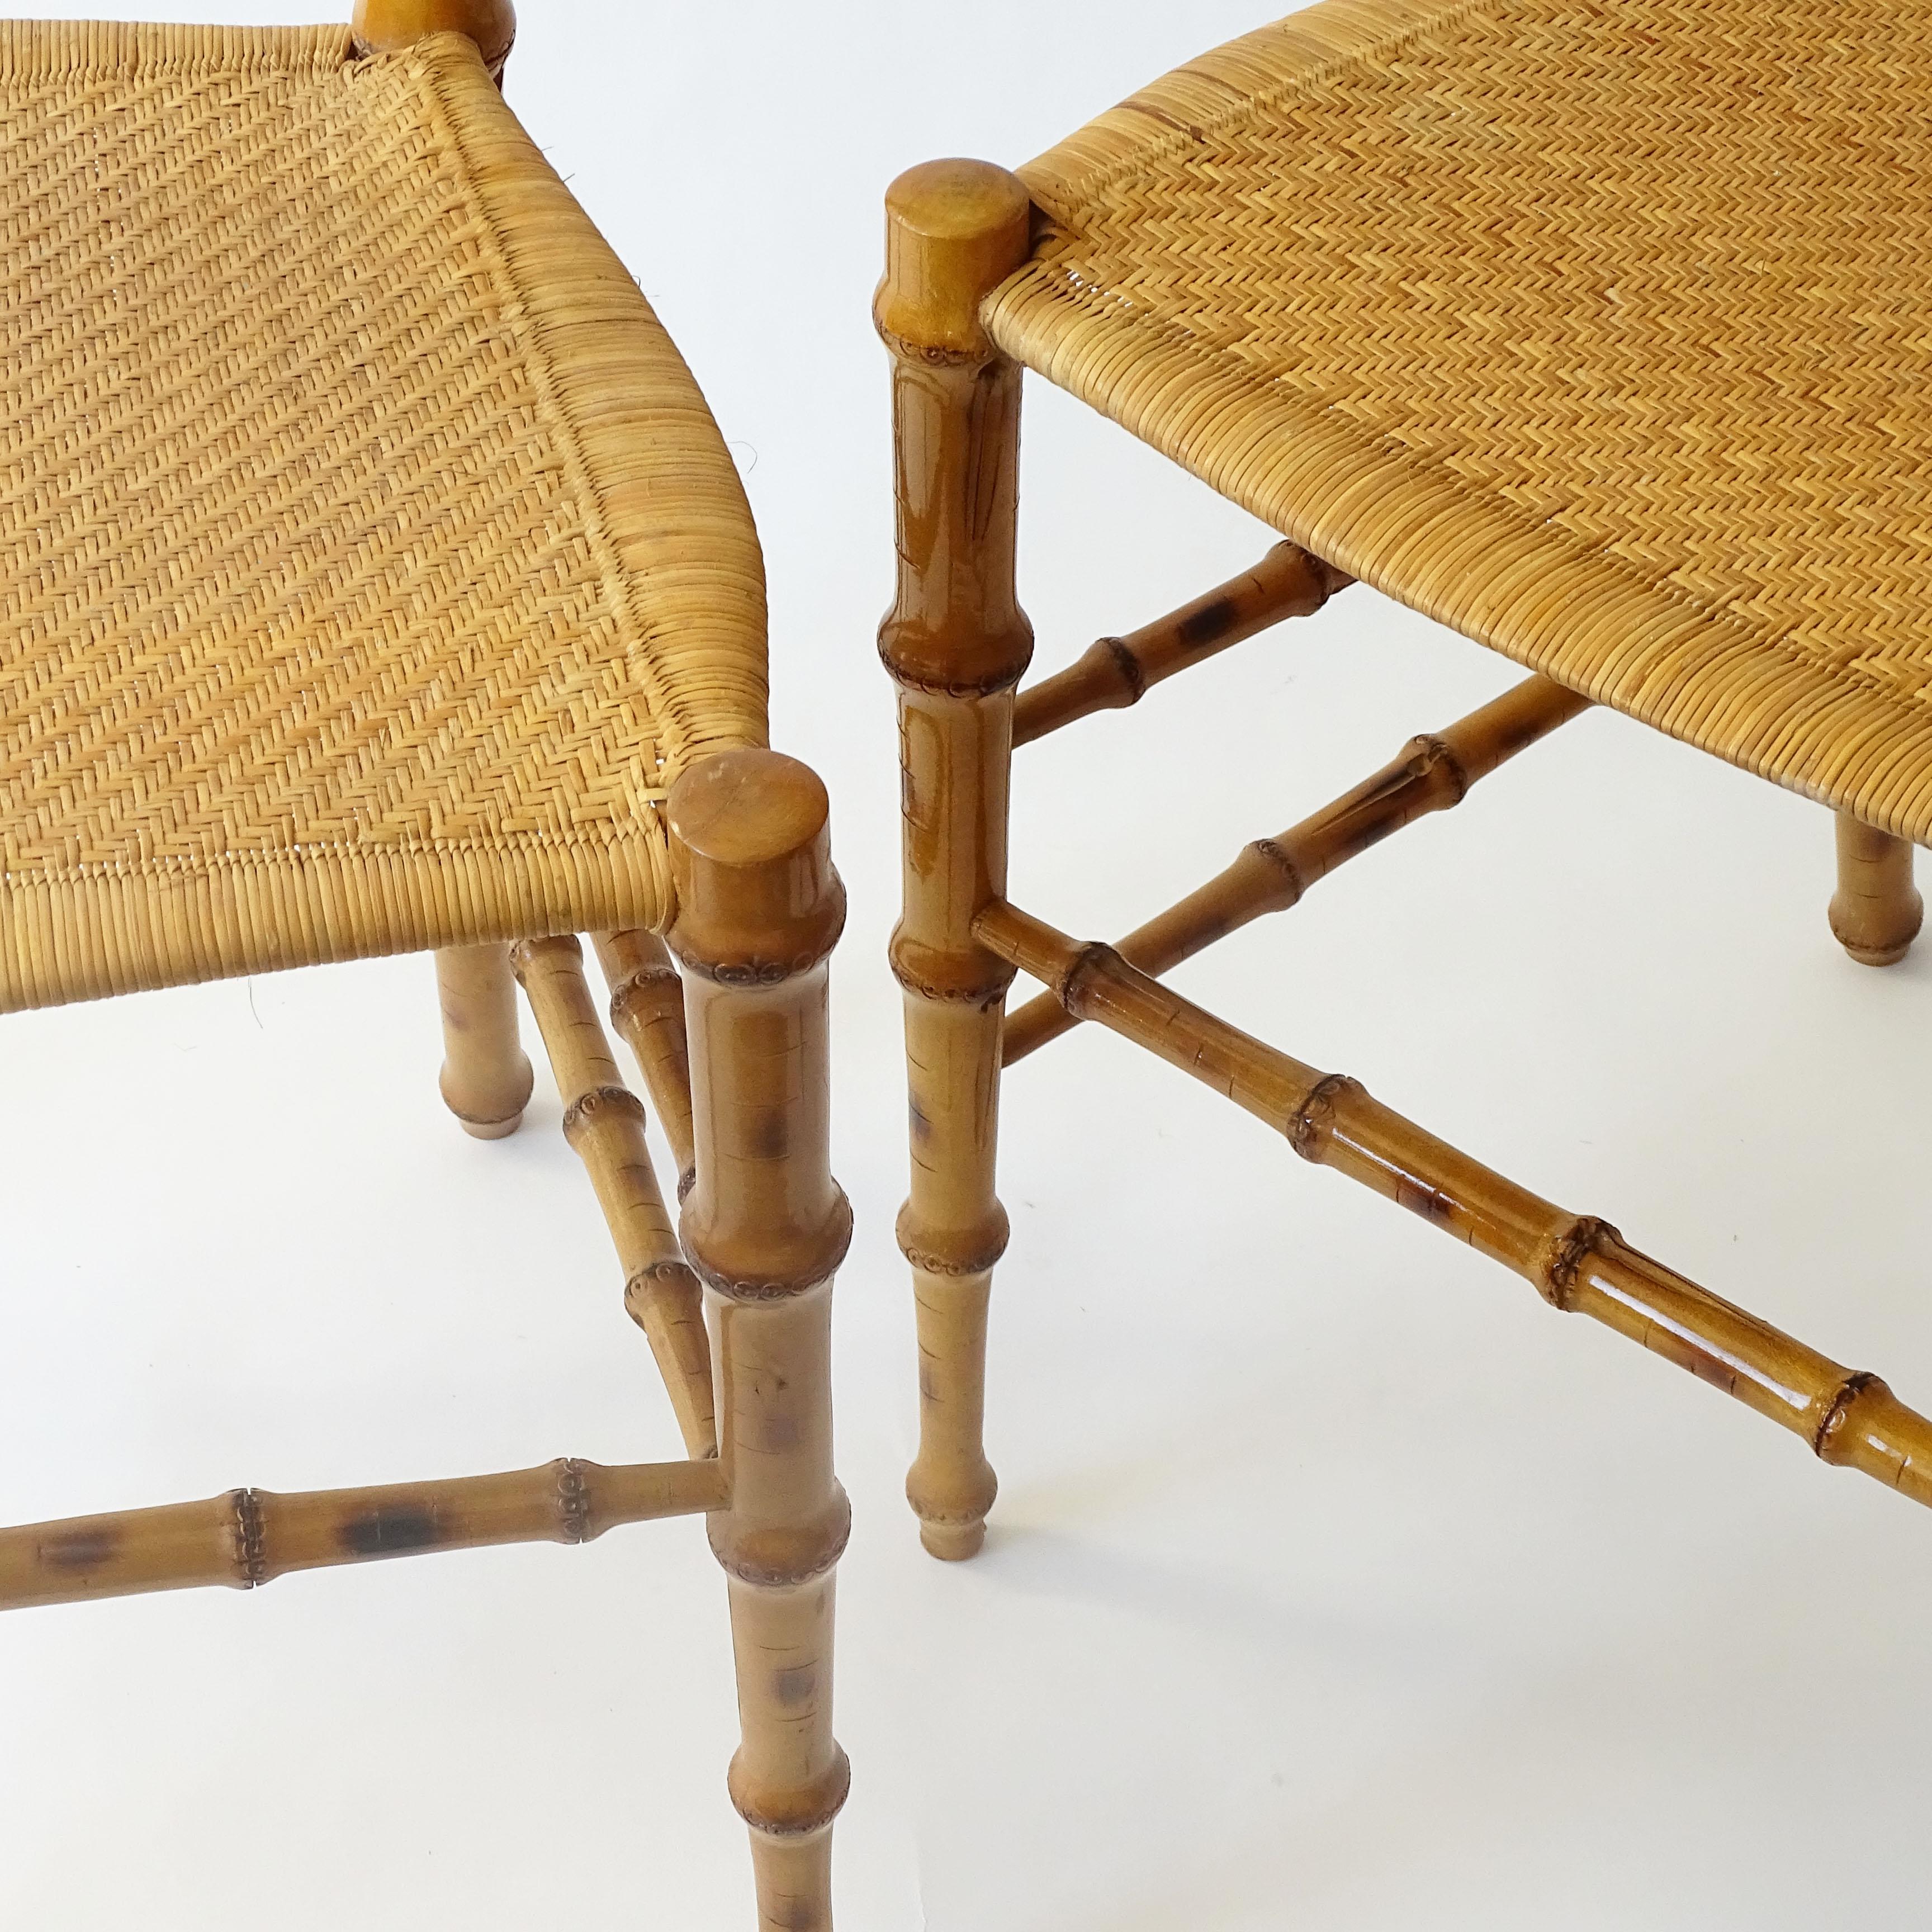 A splendid set of six faux-bamboo Chiavarina chairs with wicker seats.

